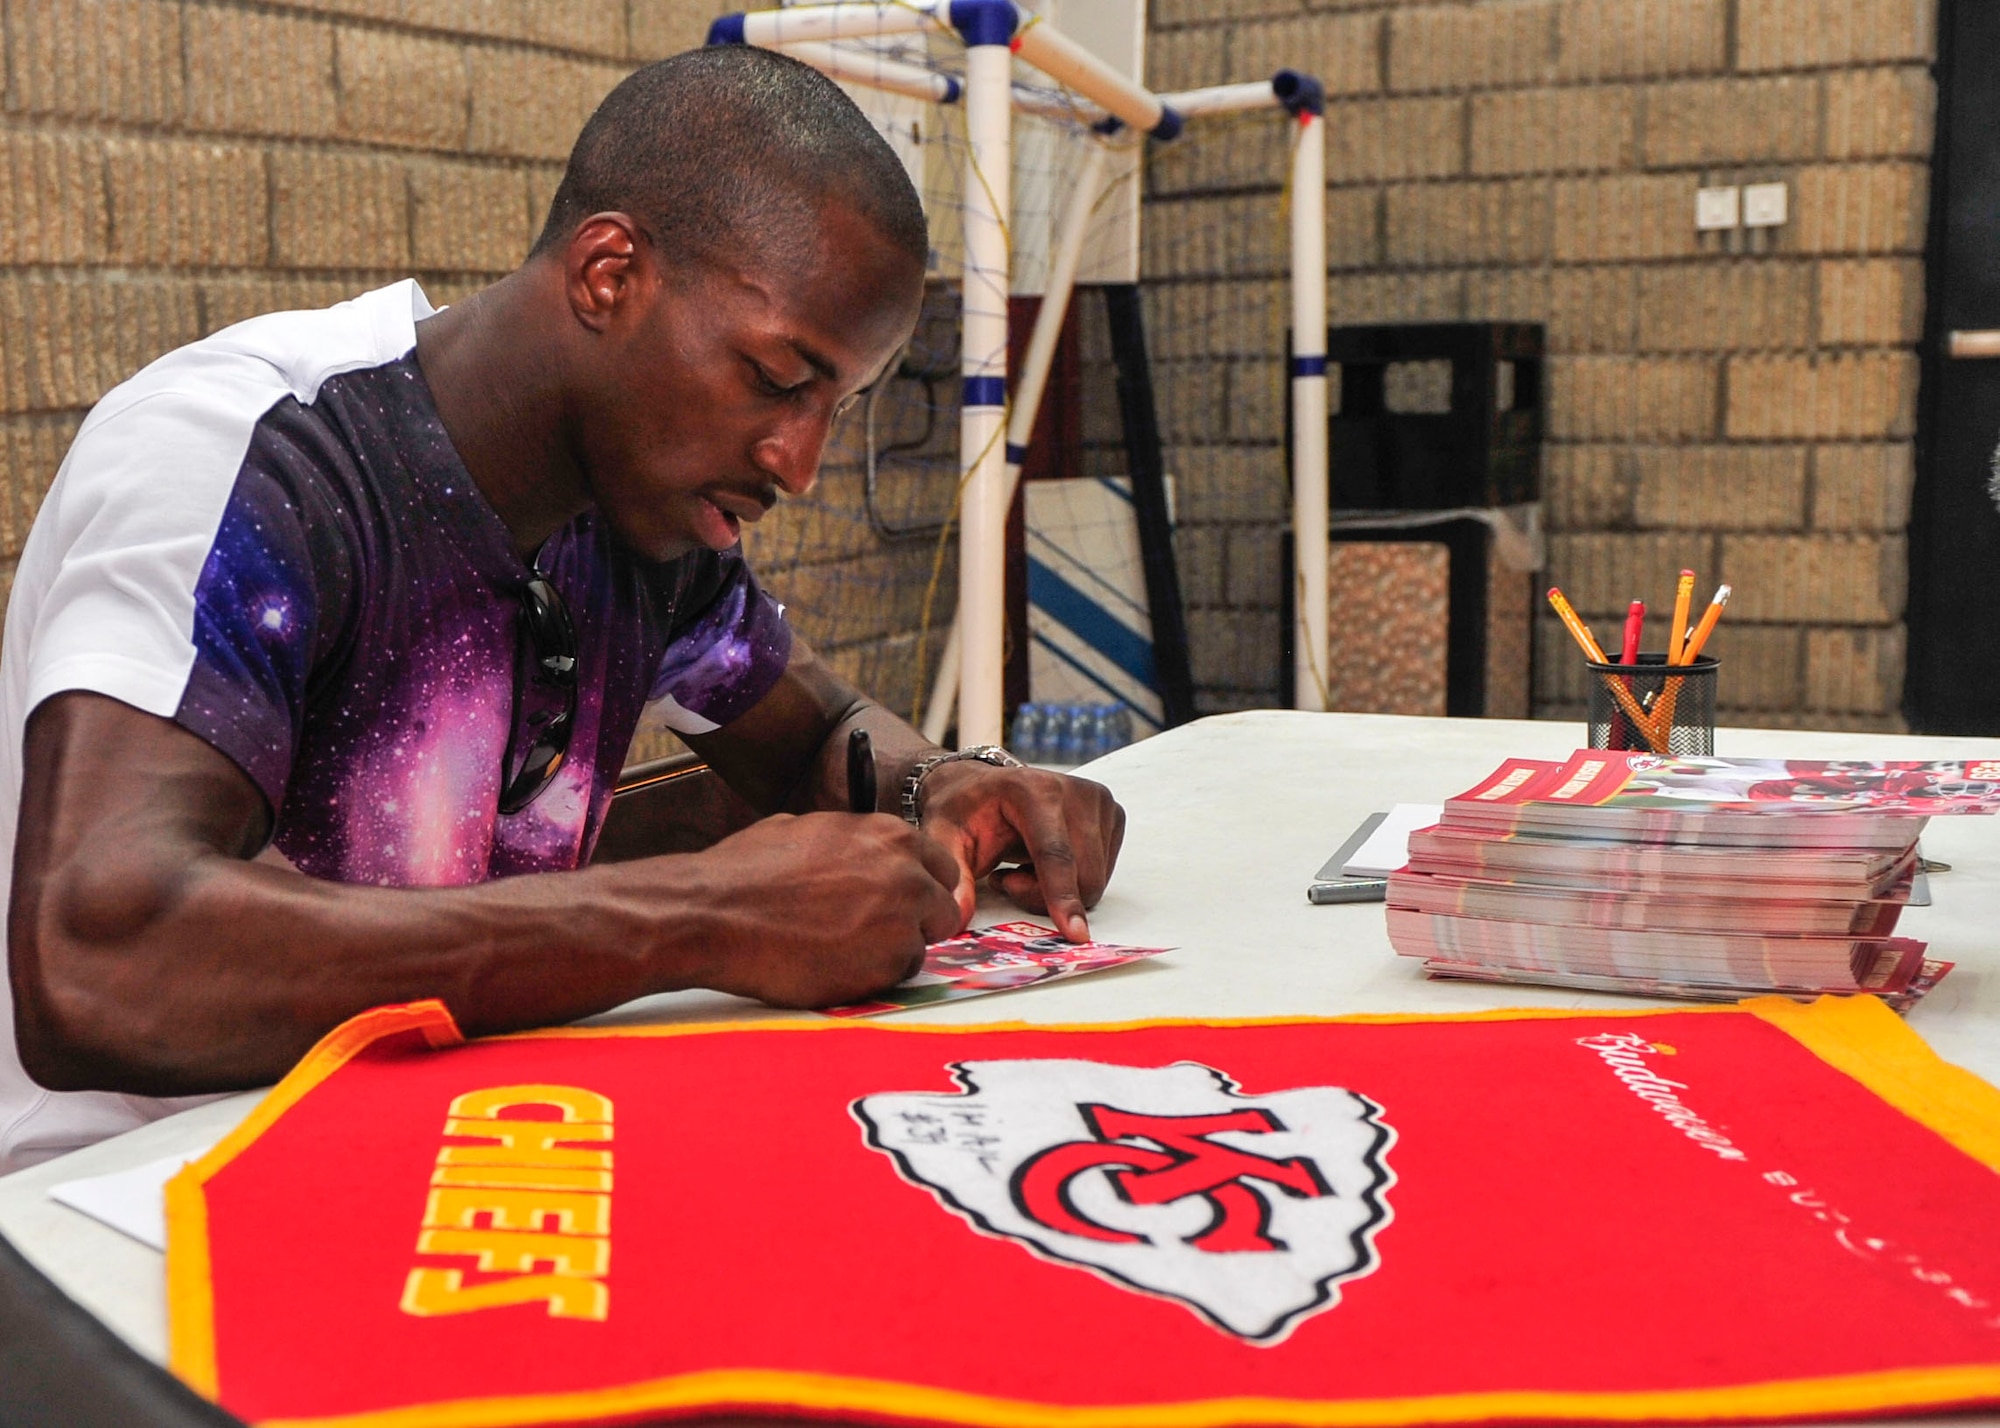 National Football League player Husain Abdullah signs autographs for Service members during a visit to Al Udeid Air Base, Qatar, July 7, 2014.   Abdullah also received a hands-on tour of AUAB as part of his visit and saw how military installations operate. Abdullah is a professional football player with the Kansas City Chiefs, where he plays cornerback. (U.S. Air Force photo by Senior Airman Colin Cates)